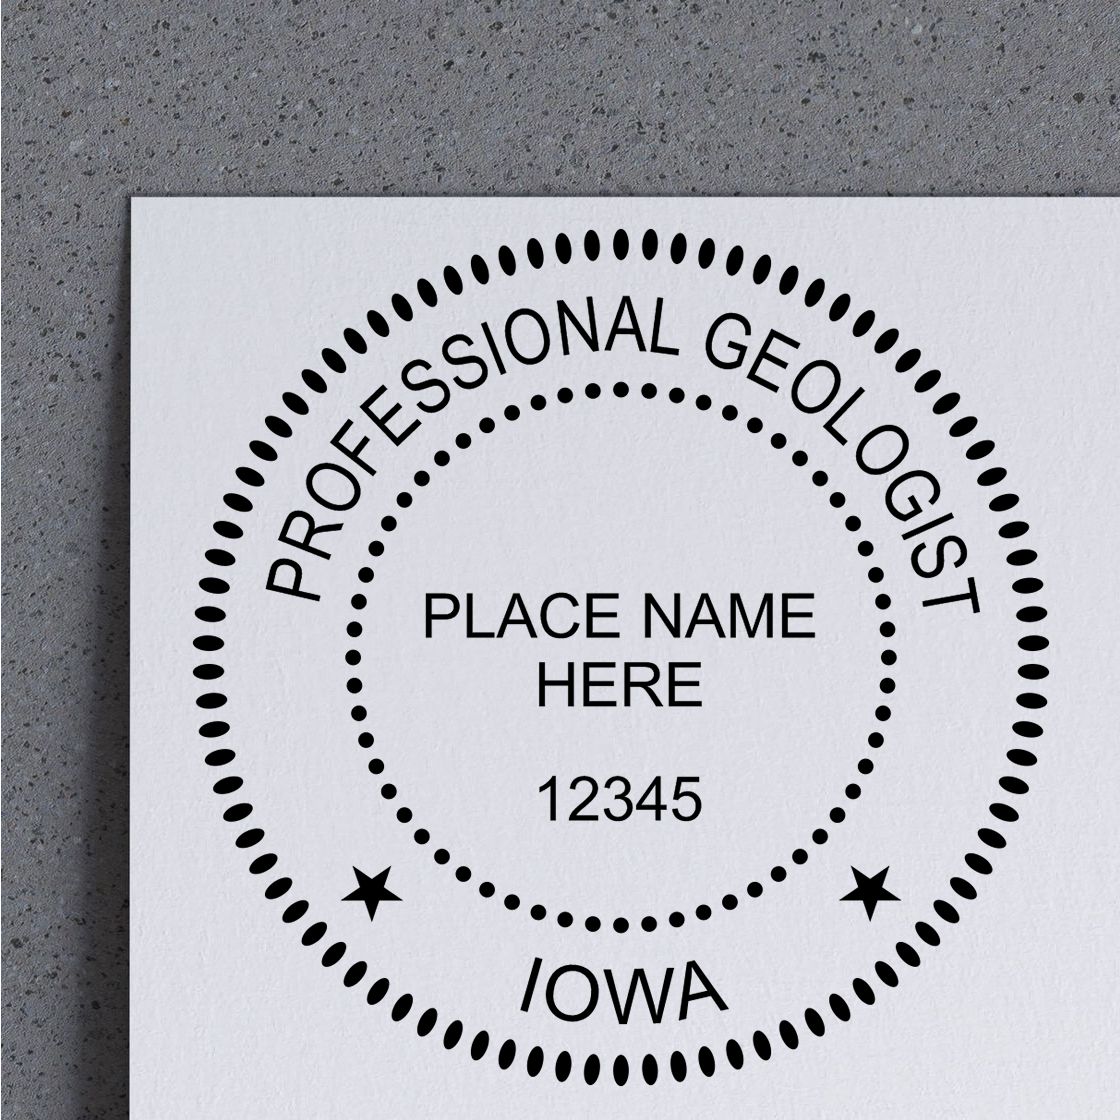 The Iowa Professional Geologist Seal Stamp stamp impression comes to life with a crisp, detailed image stamped on paper - showcasing true professional quality.